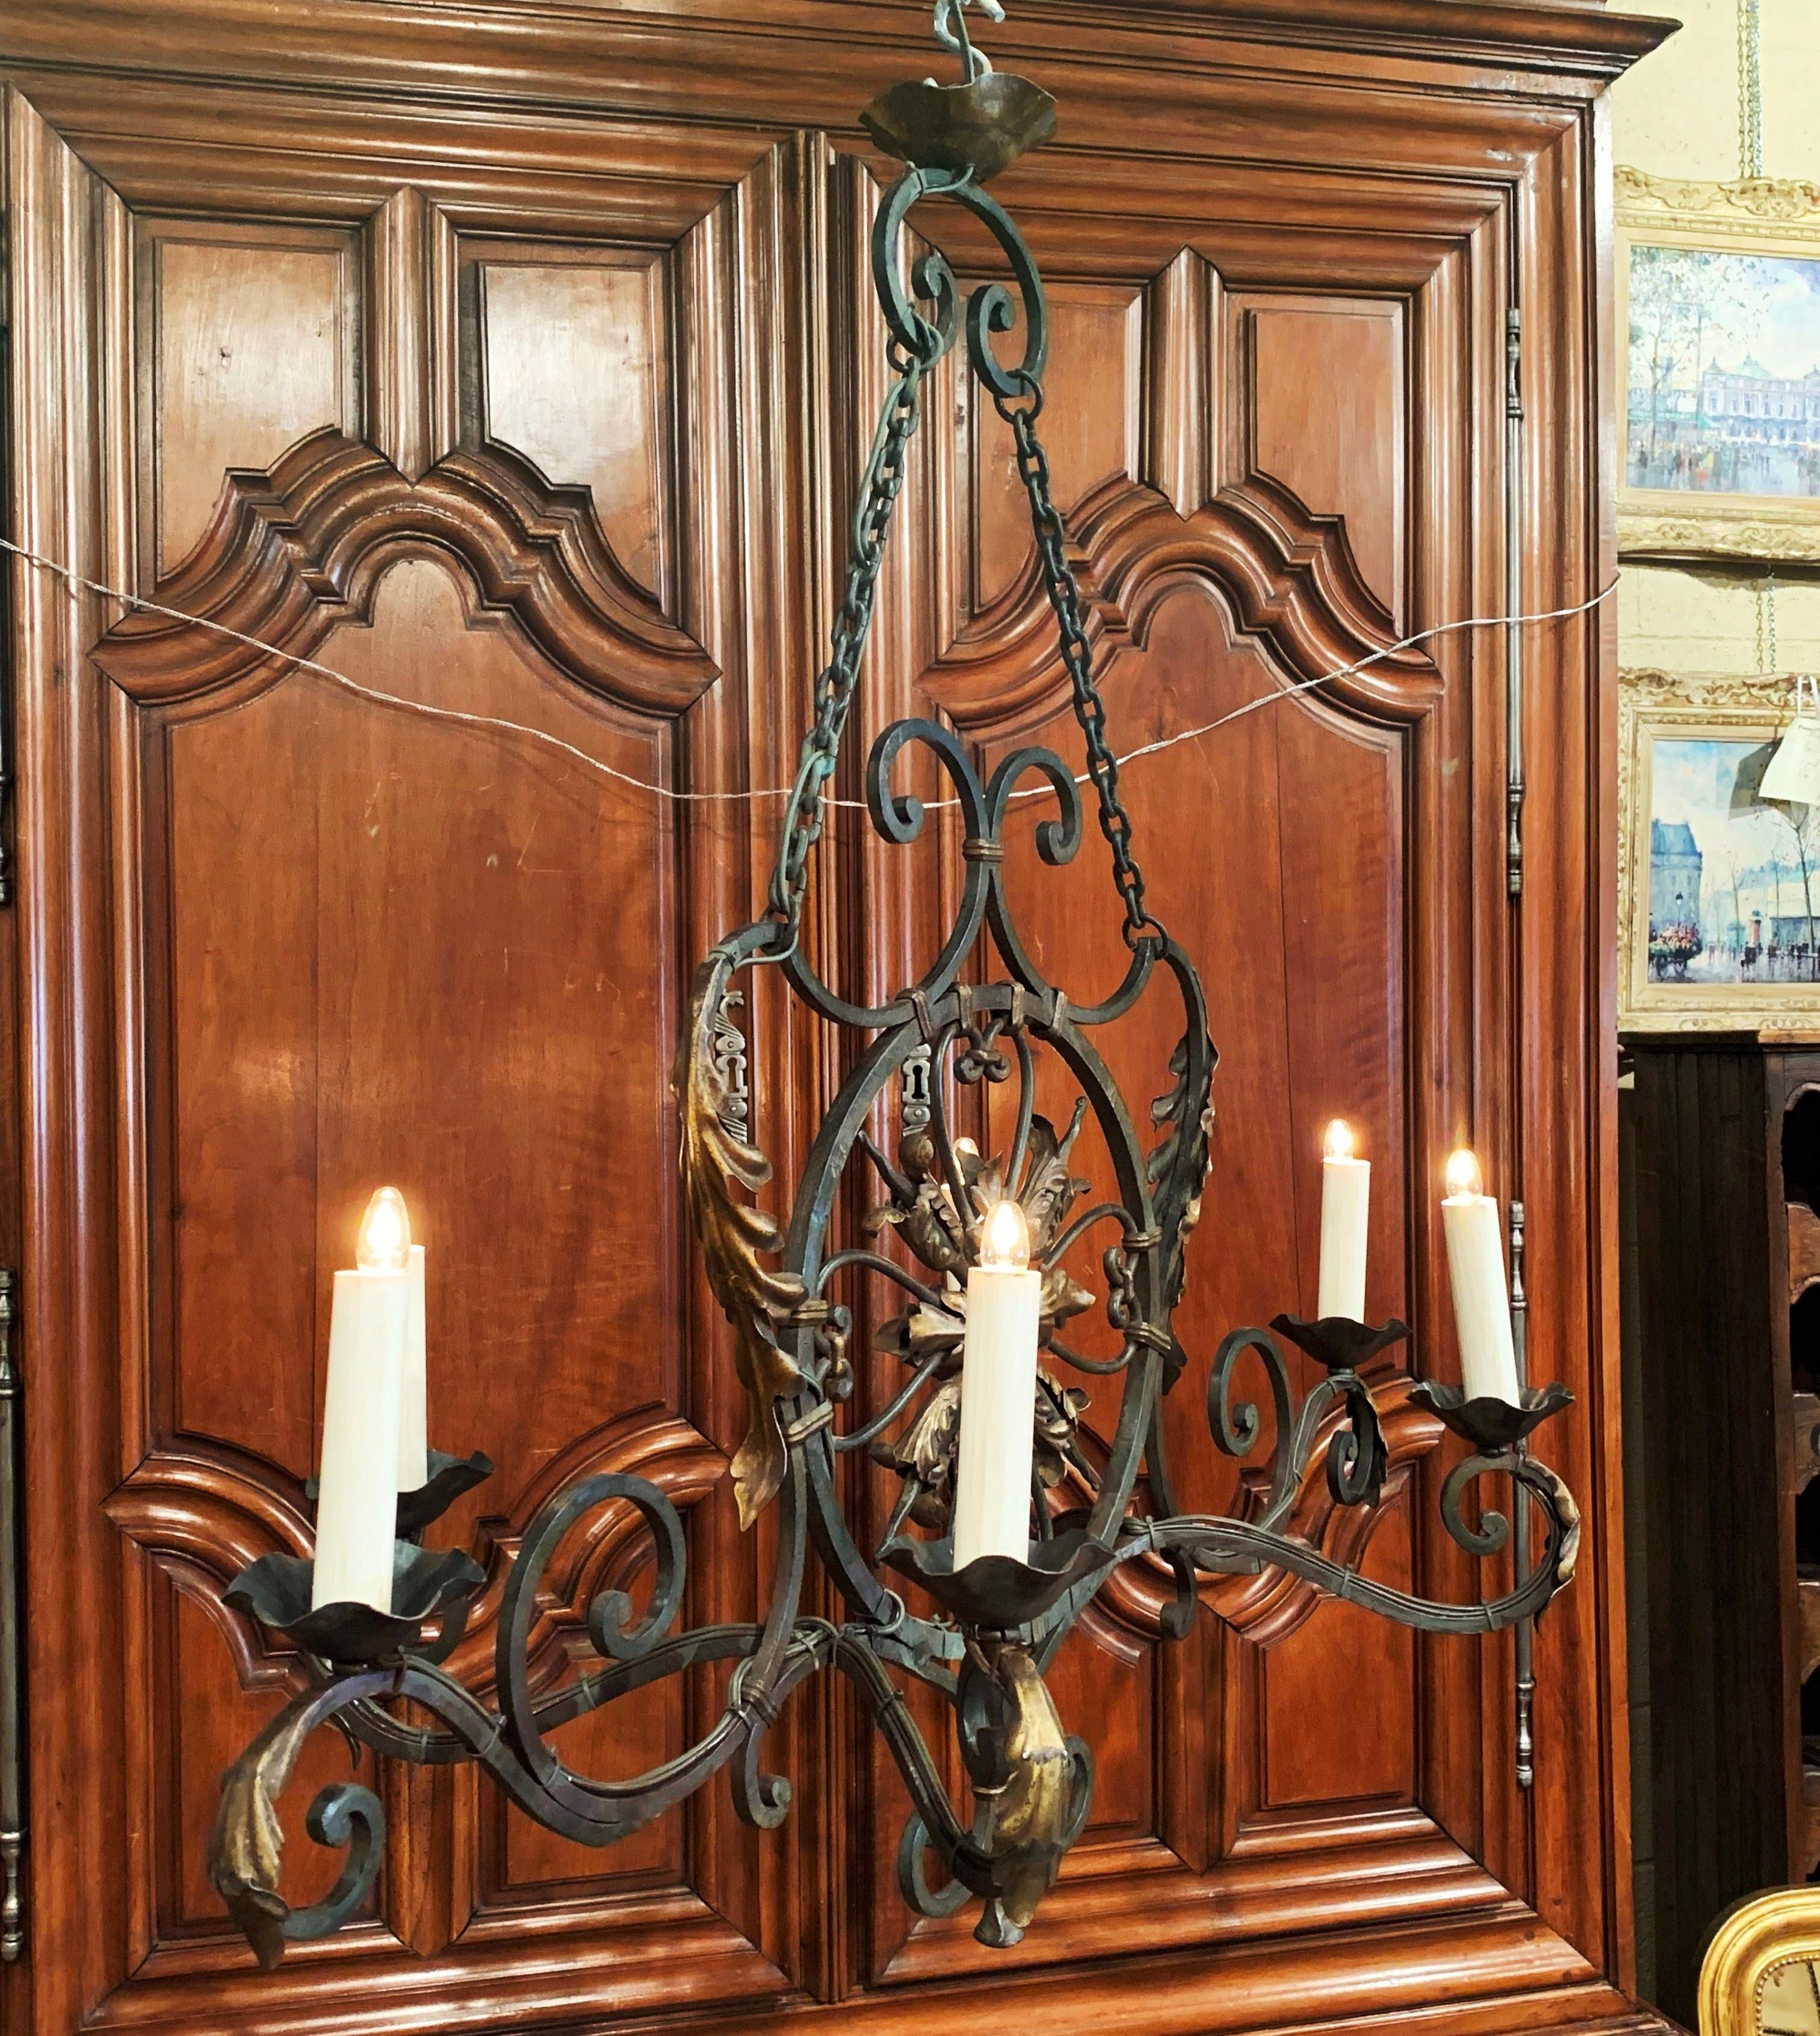 Bring some country French flair to your breakfast room with this large oblong light fixture. Crafted in France circa 1920, the antique chandelier has six arms embellished with decorative metal acanthus leaves on each arm. The fixture features a